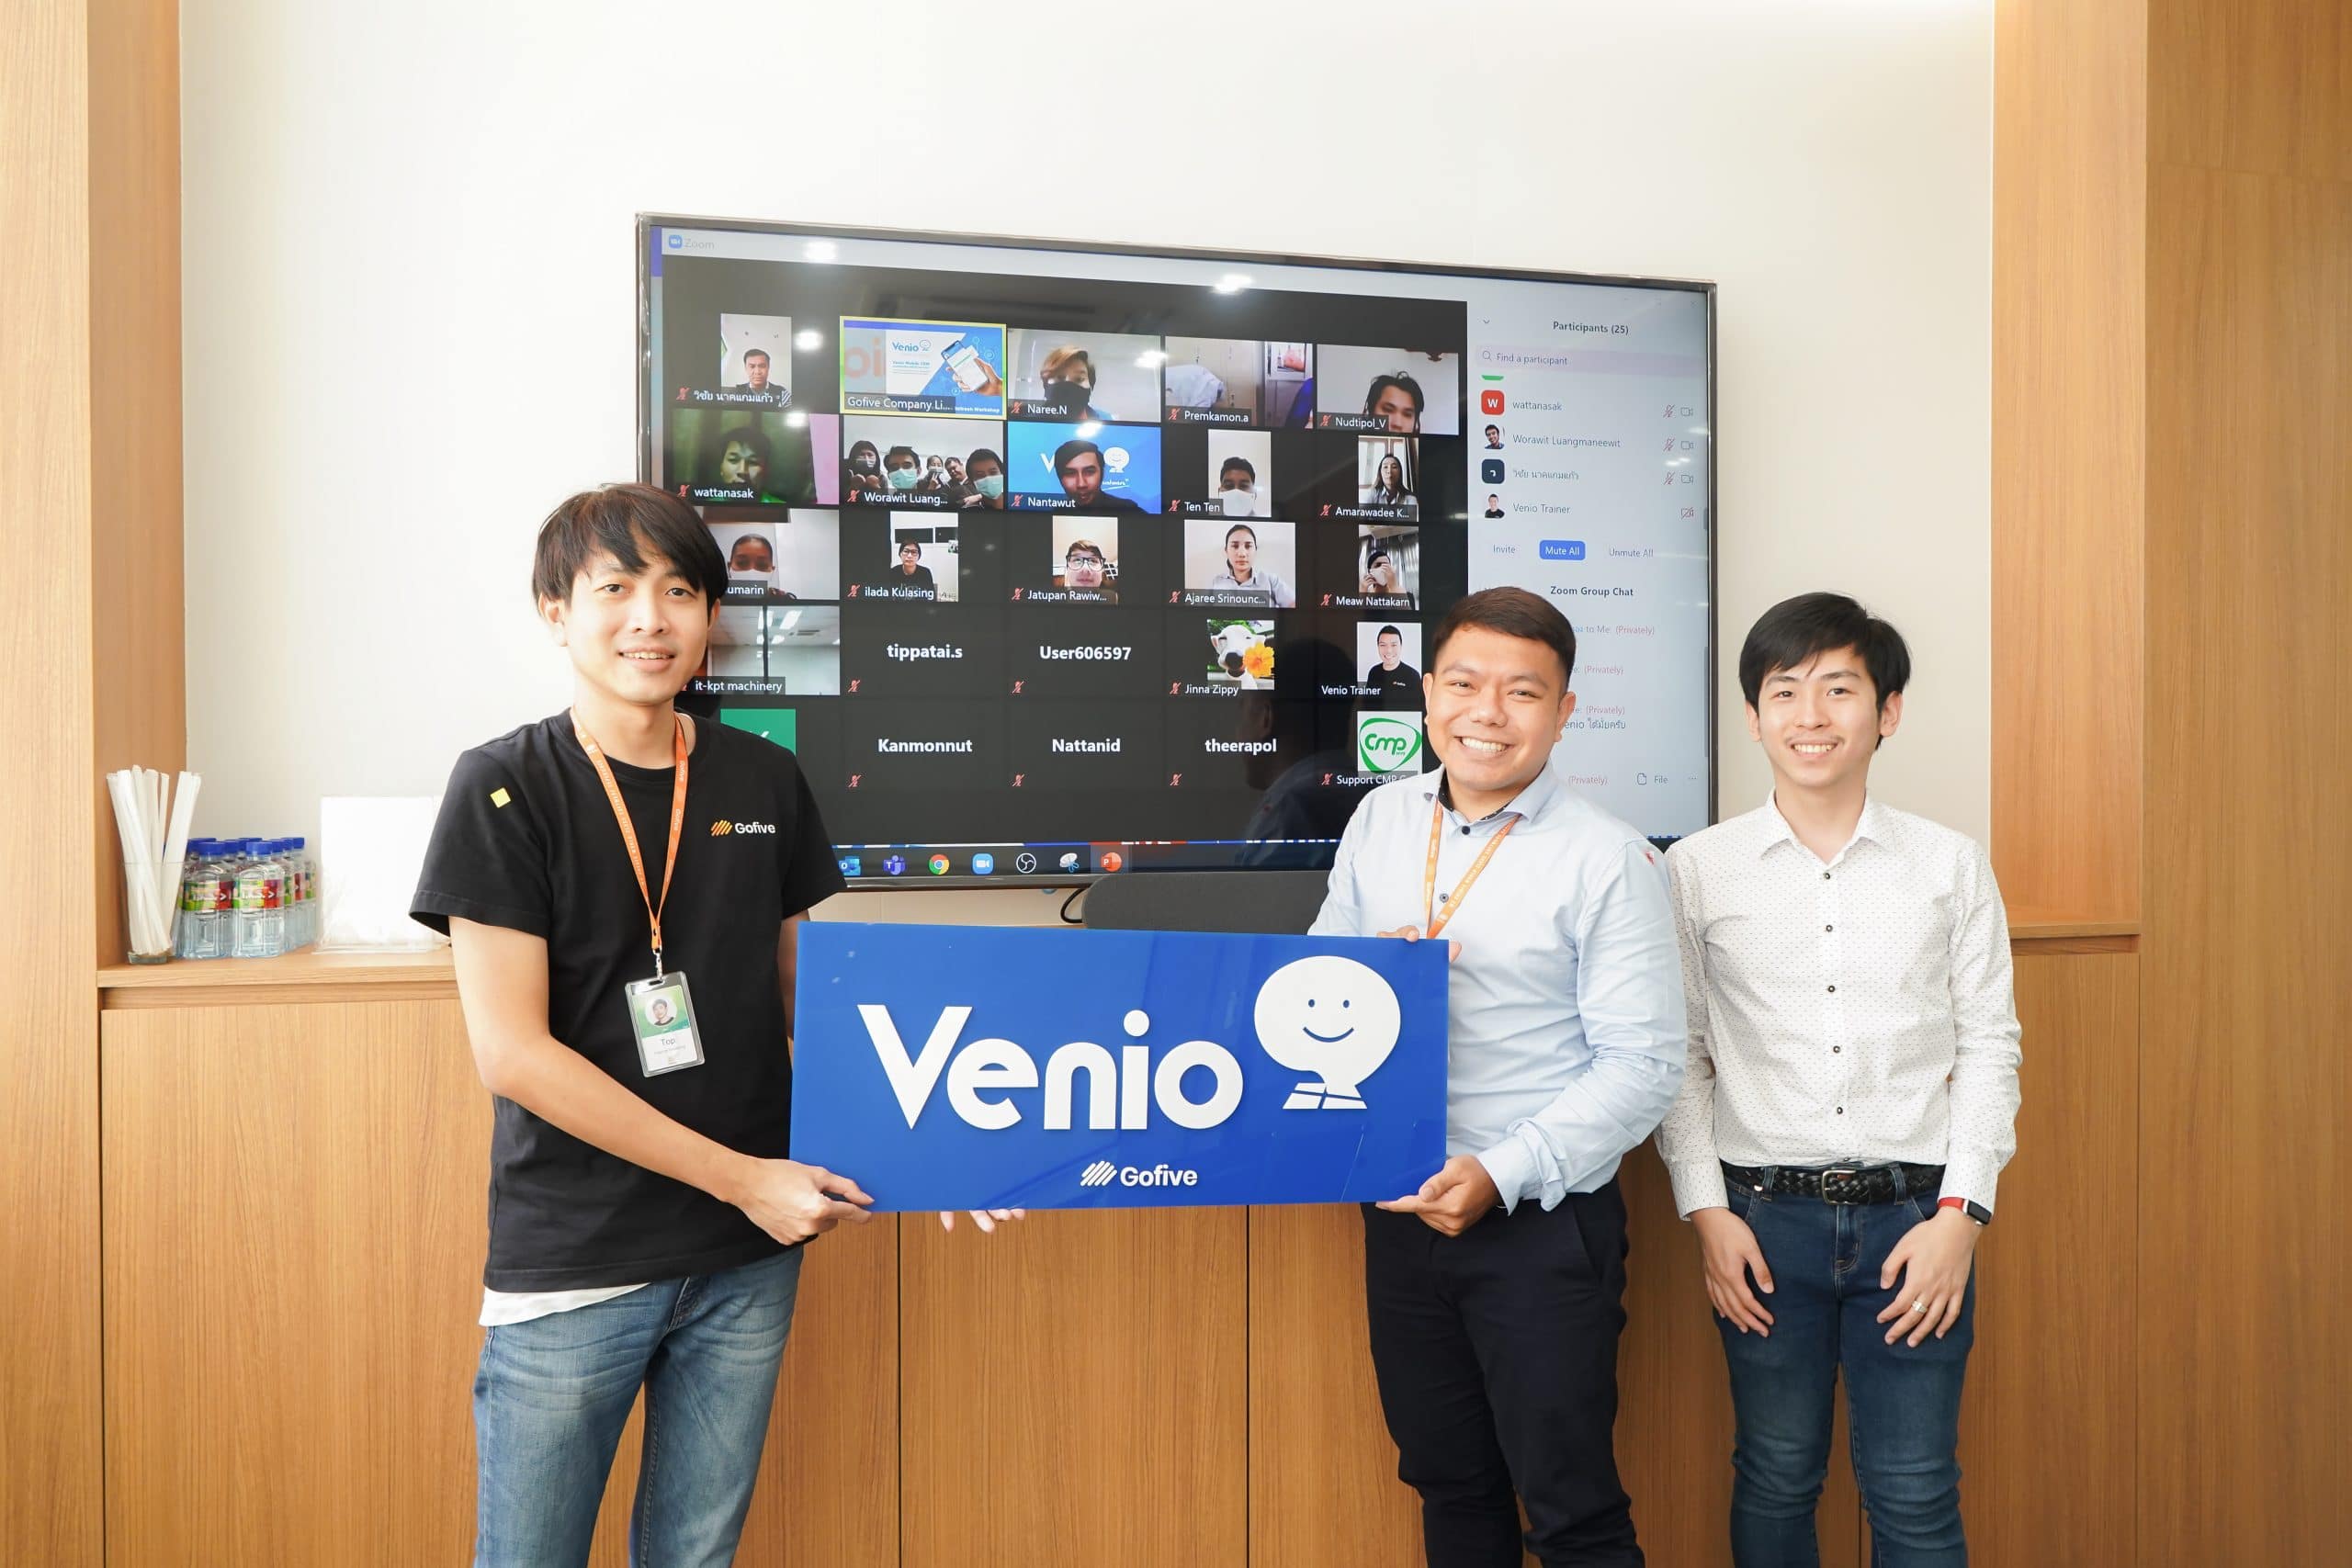 Venio team and representative taking a photo together with customers on Venio Live Refresh Workshop